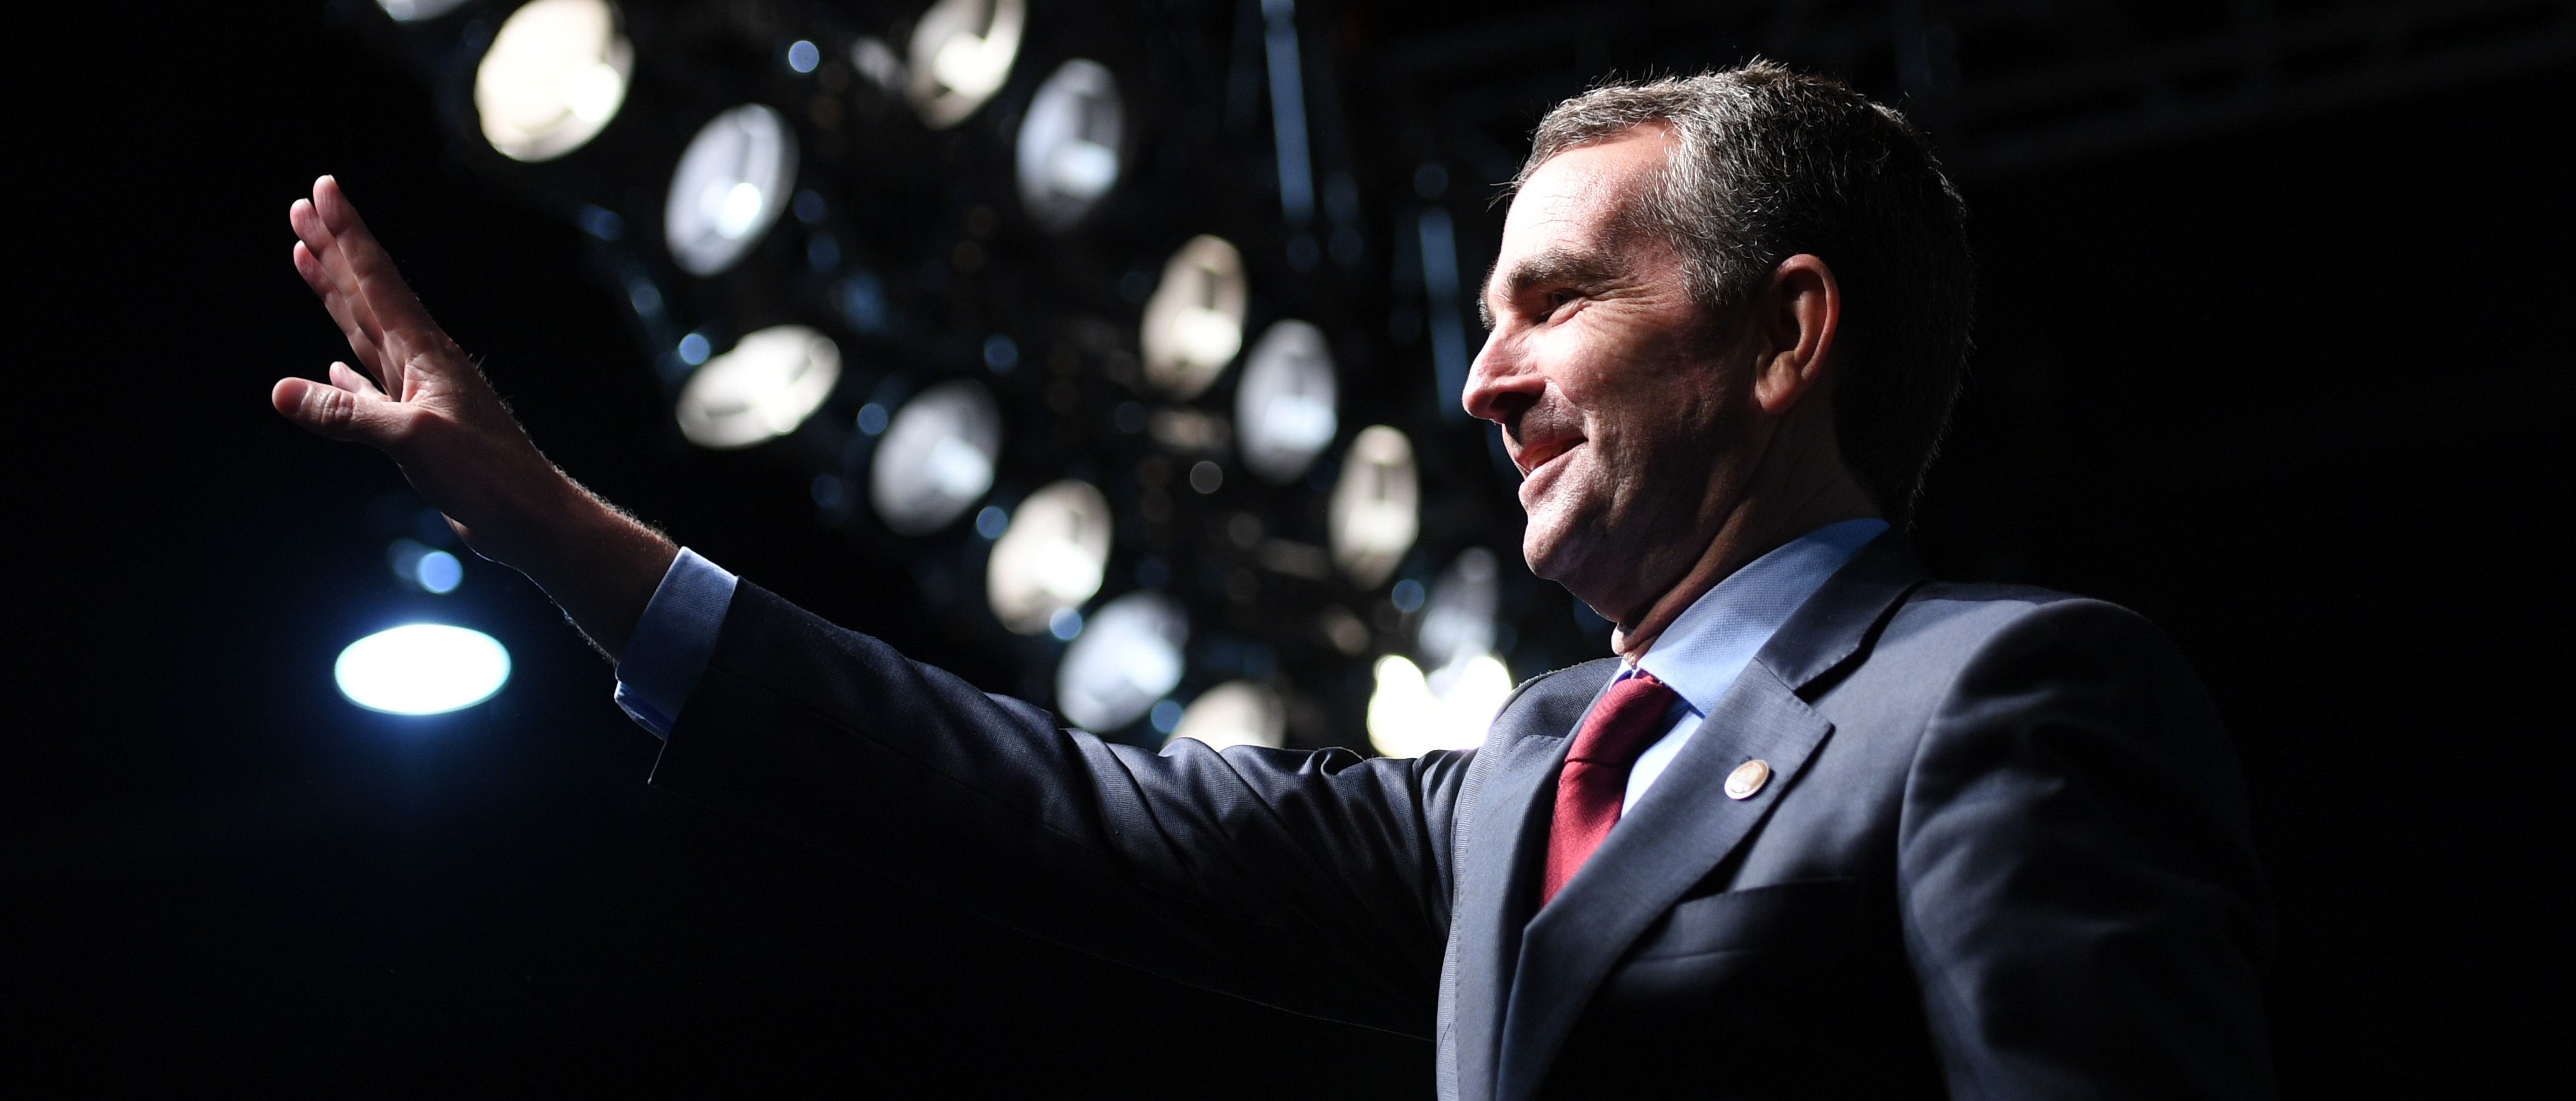 Democratic Gubernatorial Candidate Ralph Northam waves as he arrives to speak during a campaign rally in Richmond, Virginia on October 19, 2017. / AFP PHOTO / JIM WATSON (Photo credit should read JIM WATSON/AFP via Getty Images)